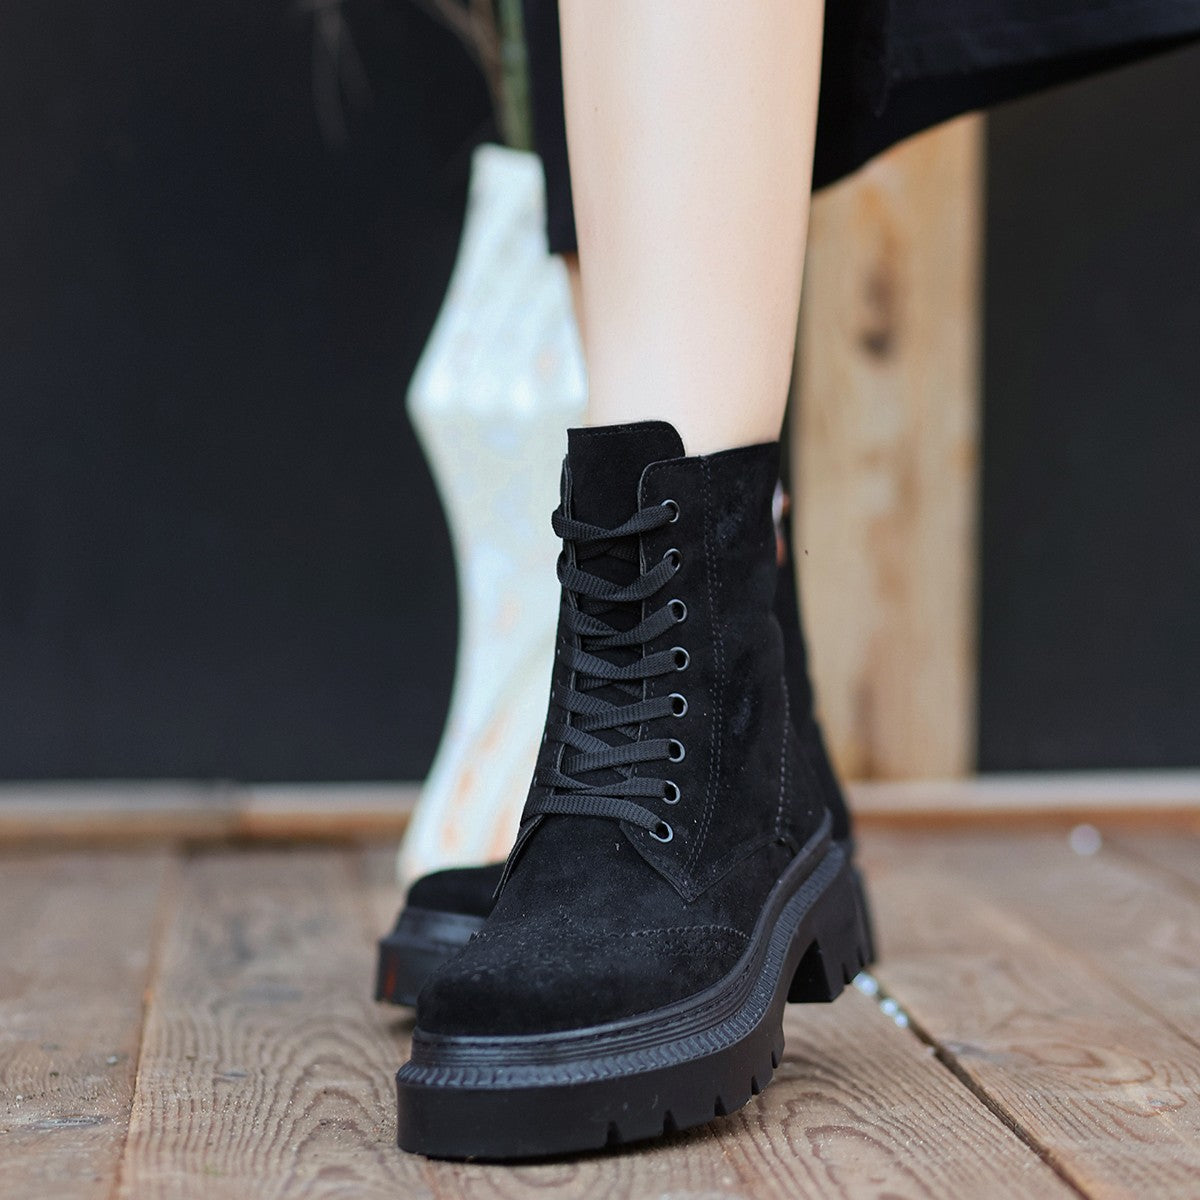 Women's Perf Black Suede Lace-Up Boots - STREETMODE ™